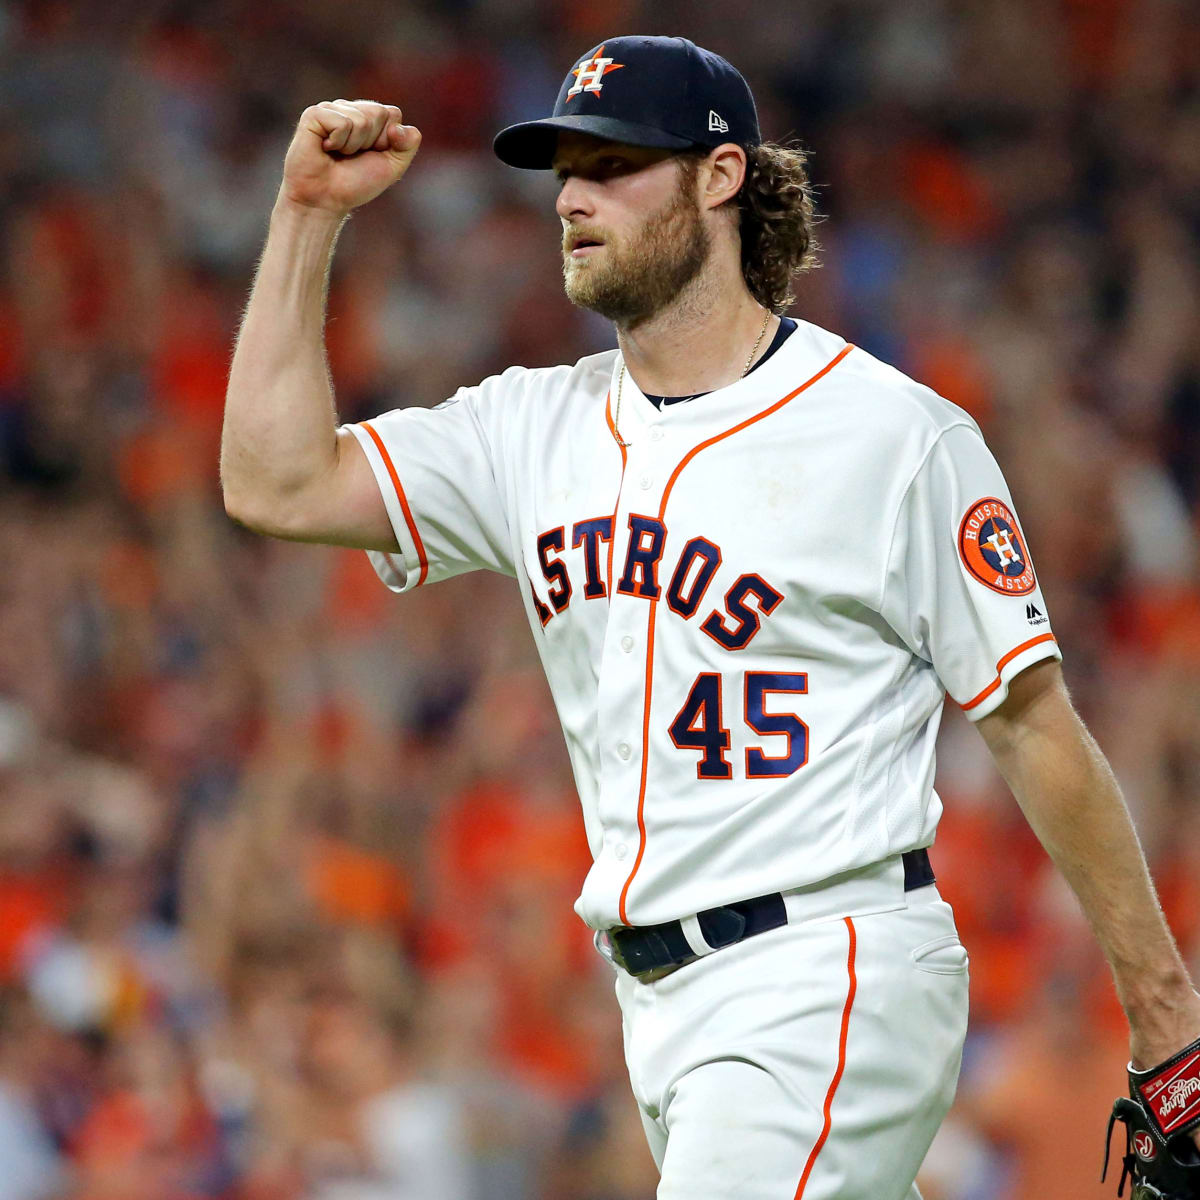 Houston Astros: Gerrit Cole needs to be ready to start Game 6 if